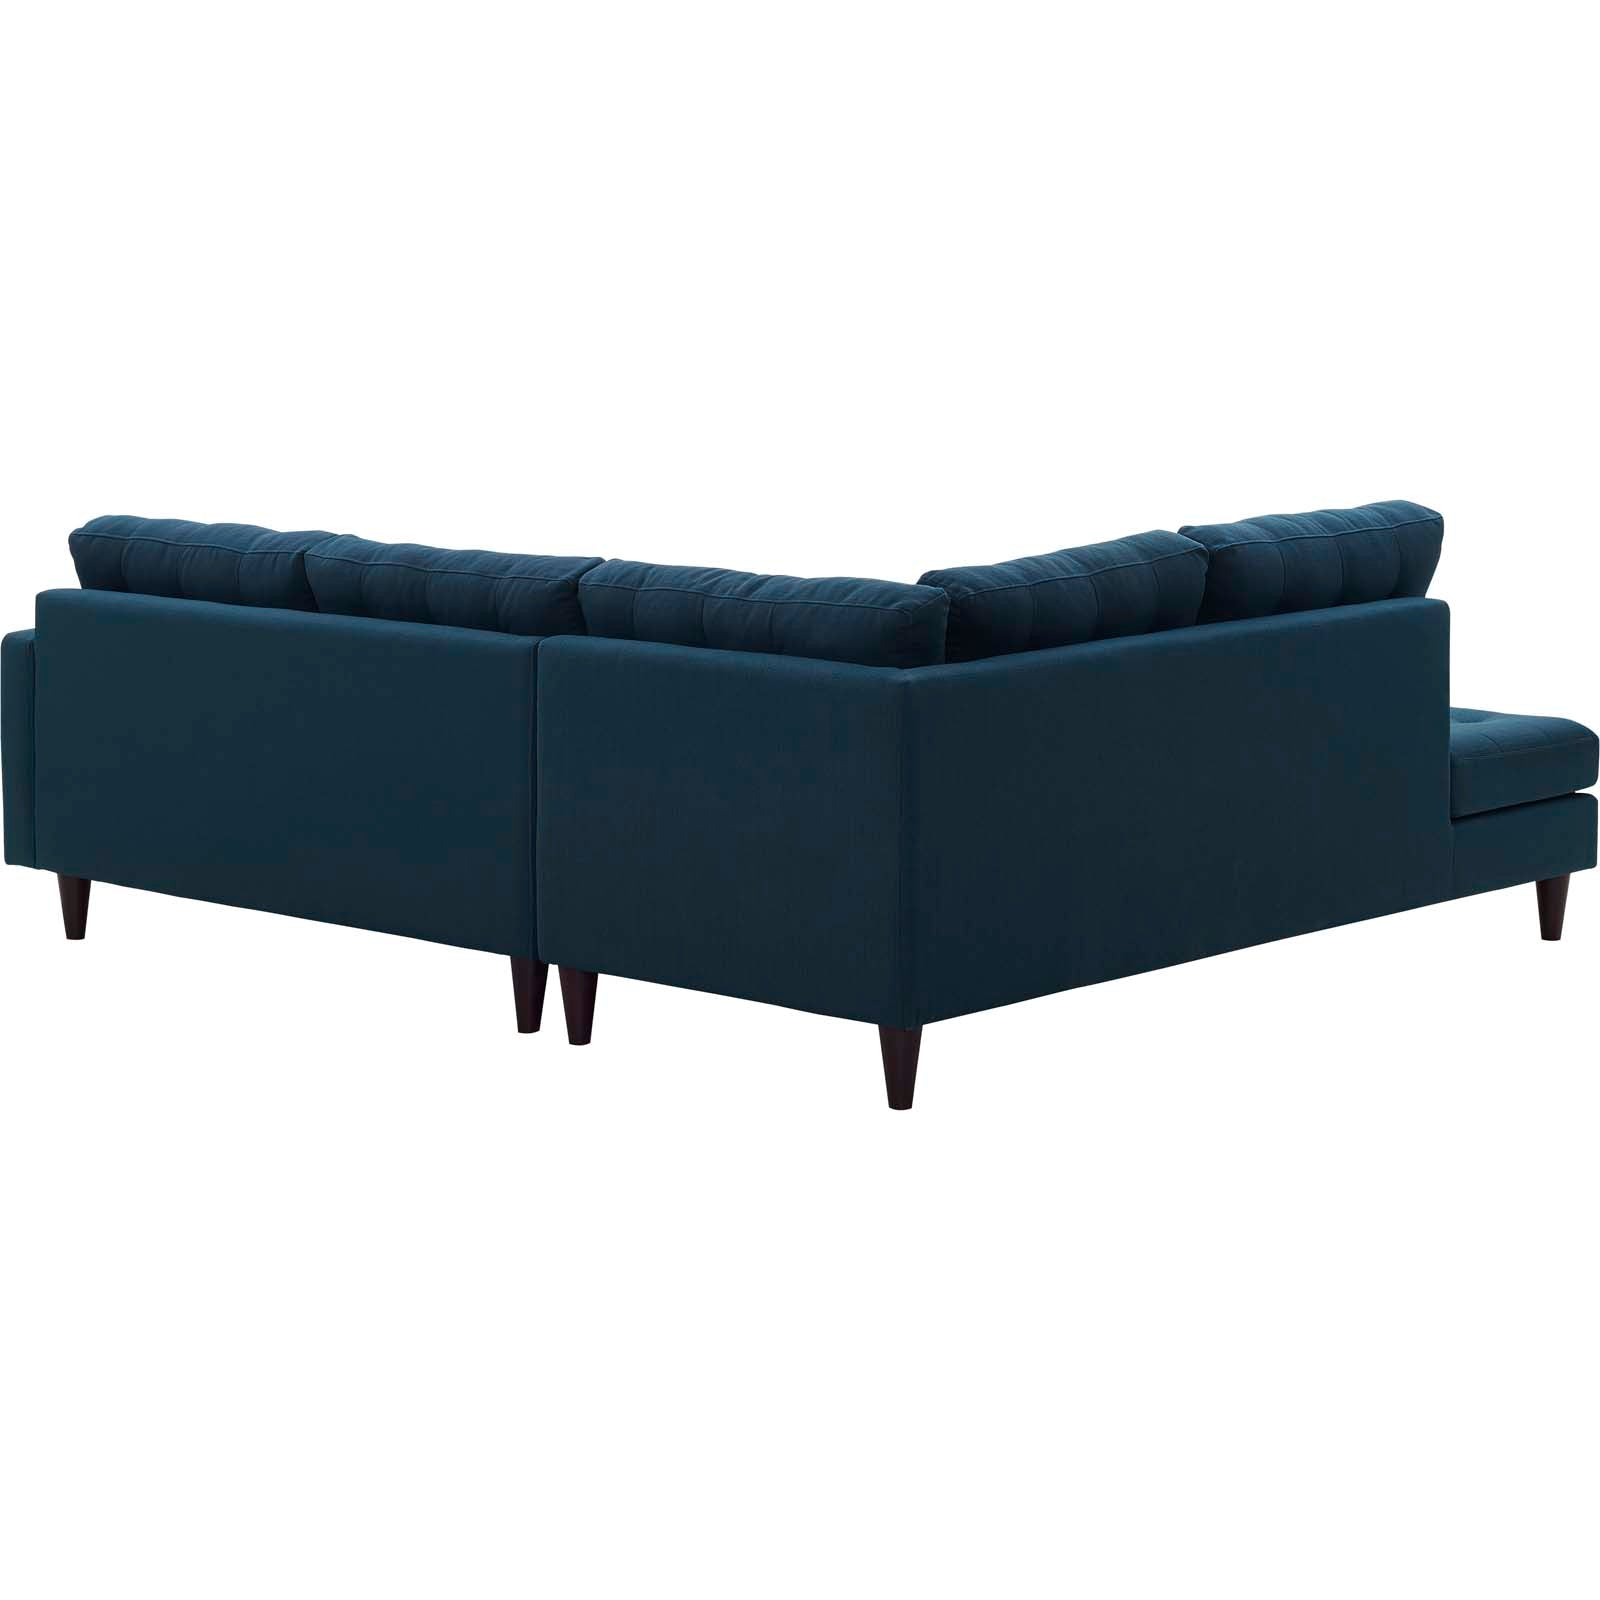 Modway Sectional Sofas - Empress 2 Piece Upholstered Fabric Left Facing Bumper Sectional Azure